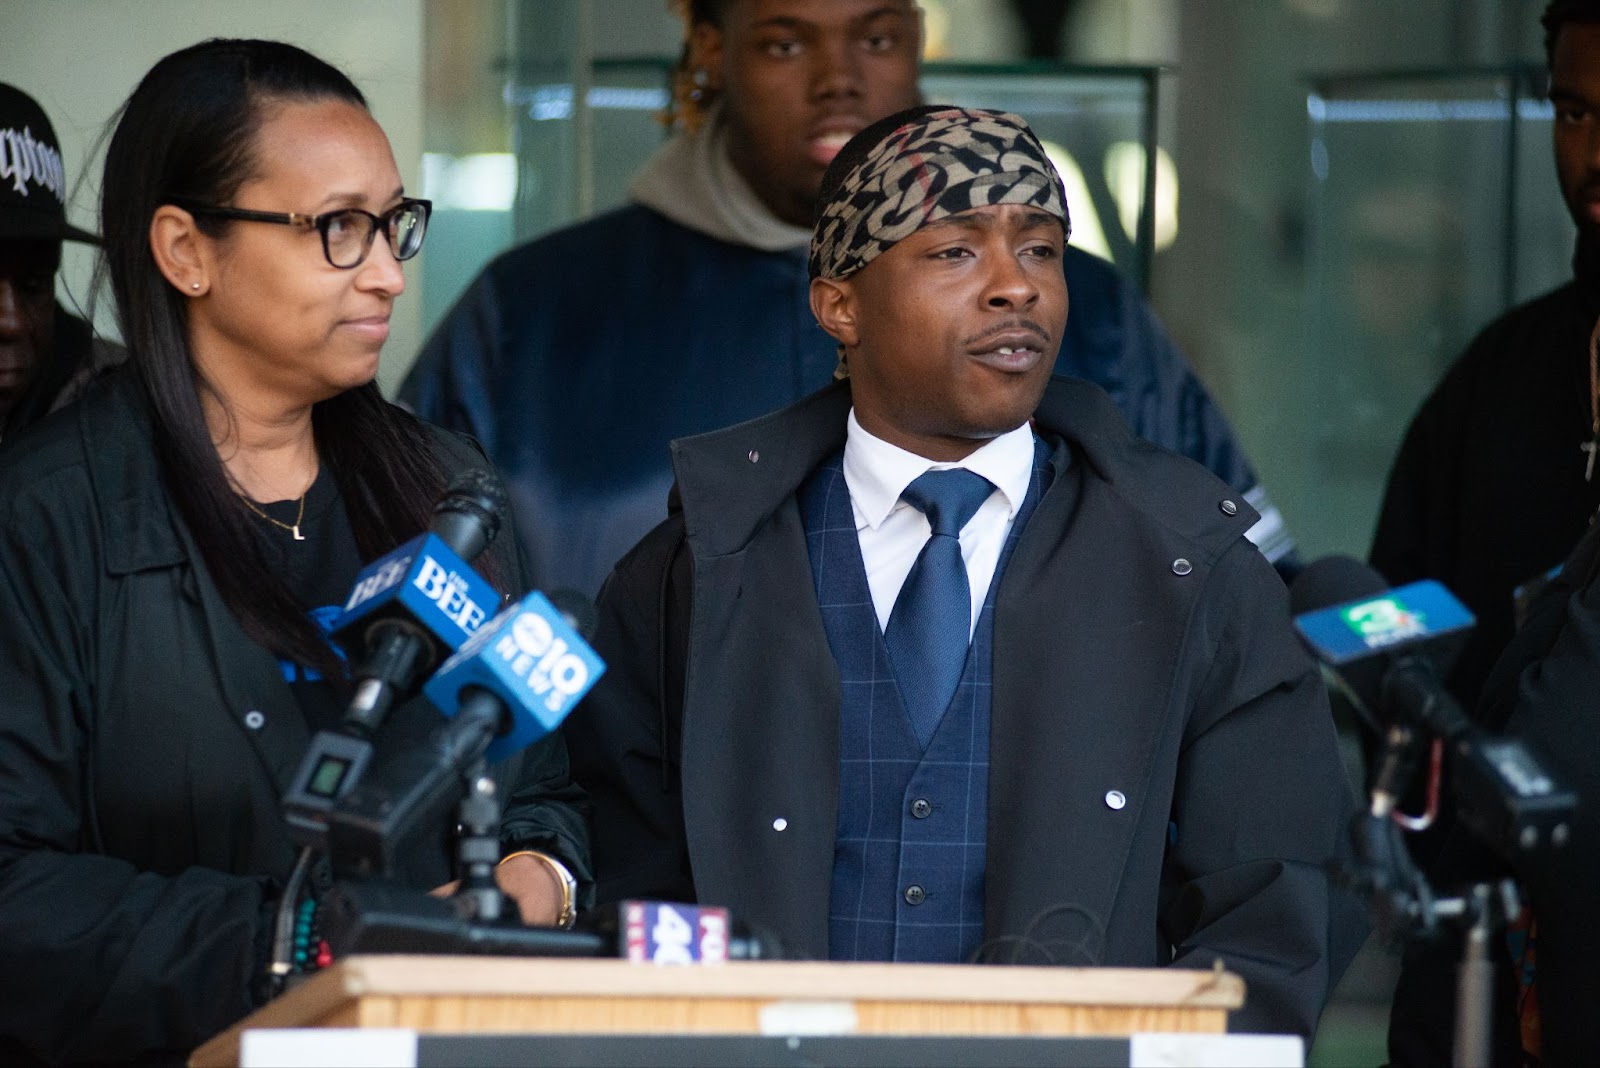 Stevante Clark, founder of the IAMSAC Foundation and brother of Stephon Clark, addresses the media as Leia Schenk, founder of EMPACT, stands to his right.